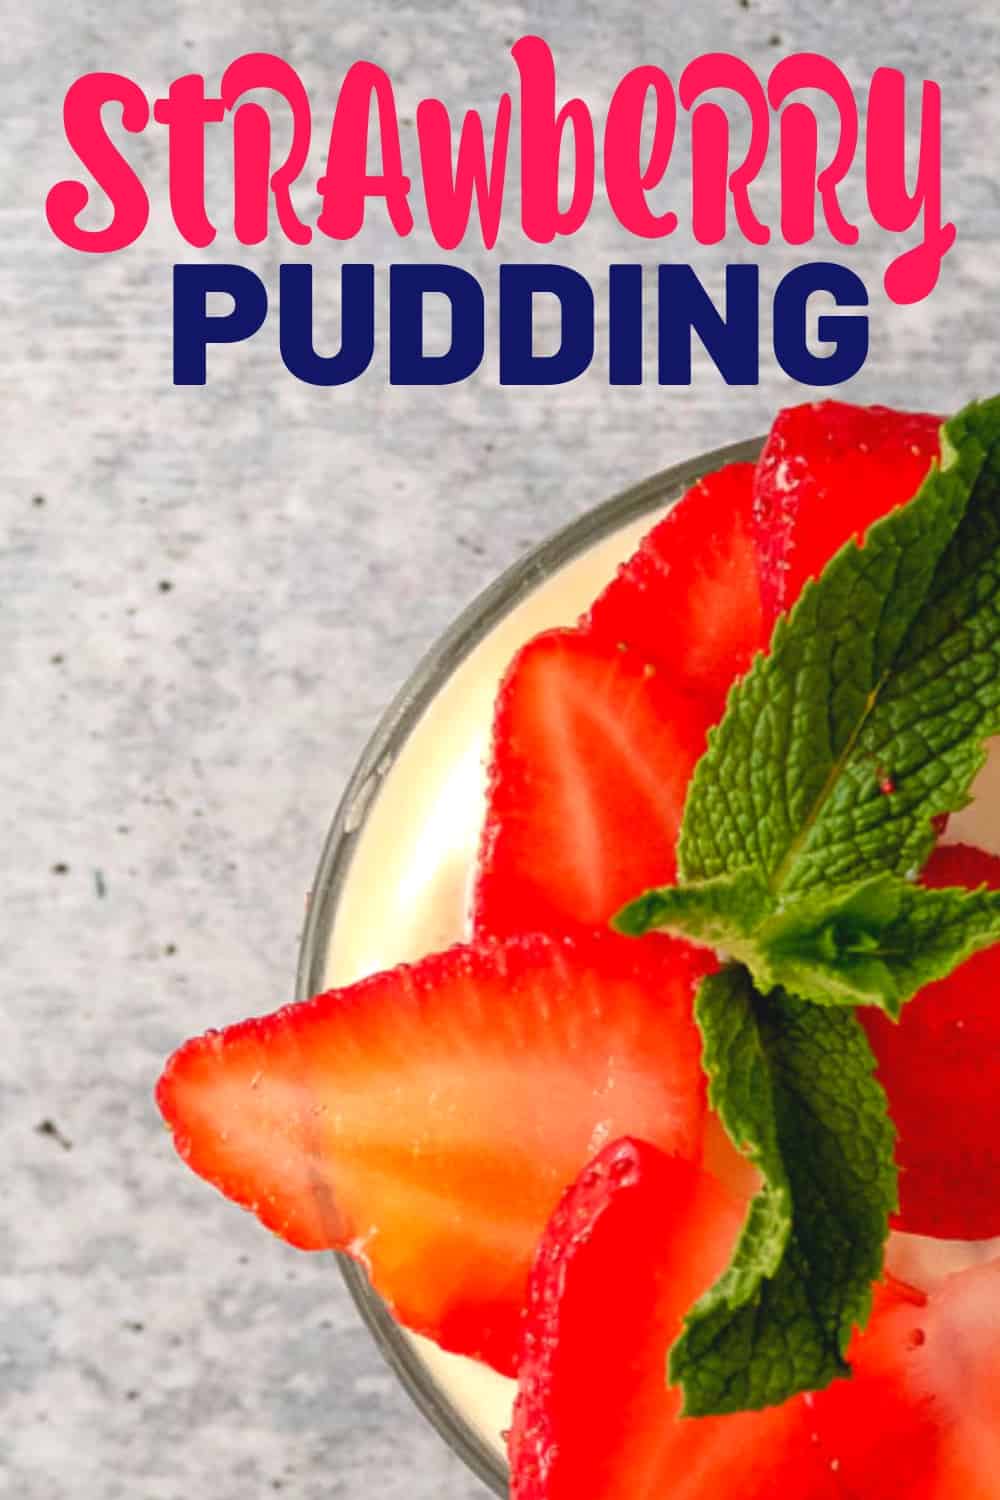 Creamy Strawberry Pudding - vanilla pudding with fresh whipped cream and sliced strawberries. Refreshing and delicious! #glutenfree #instant #easydessert #nobake #jello #jellorecipe #pudding ➤ cheerfulcook.com via @cheerfulcook